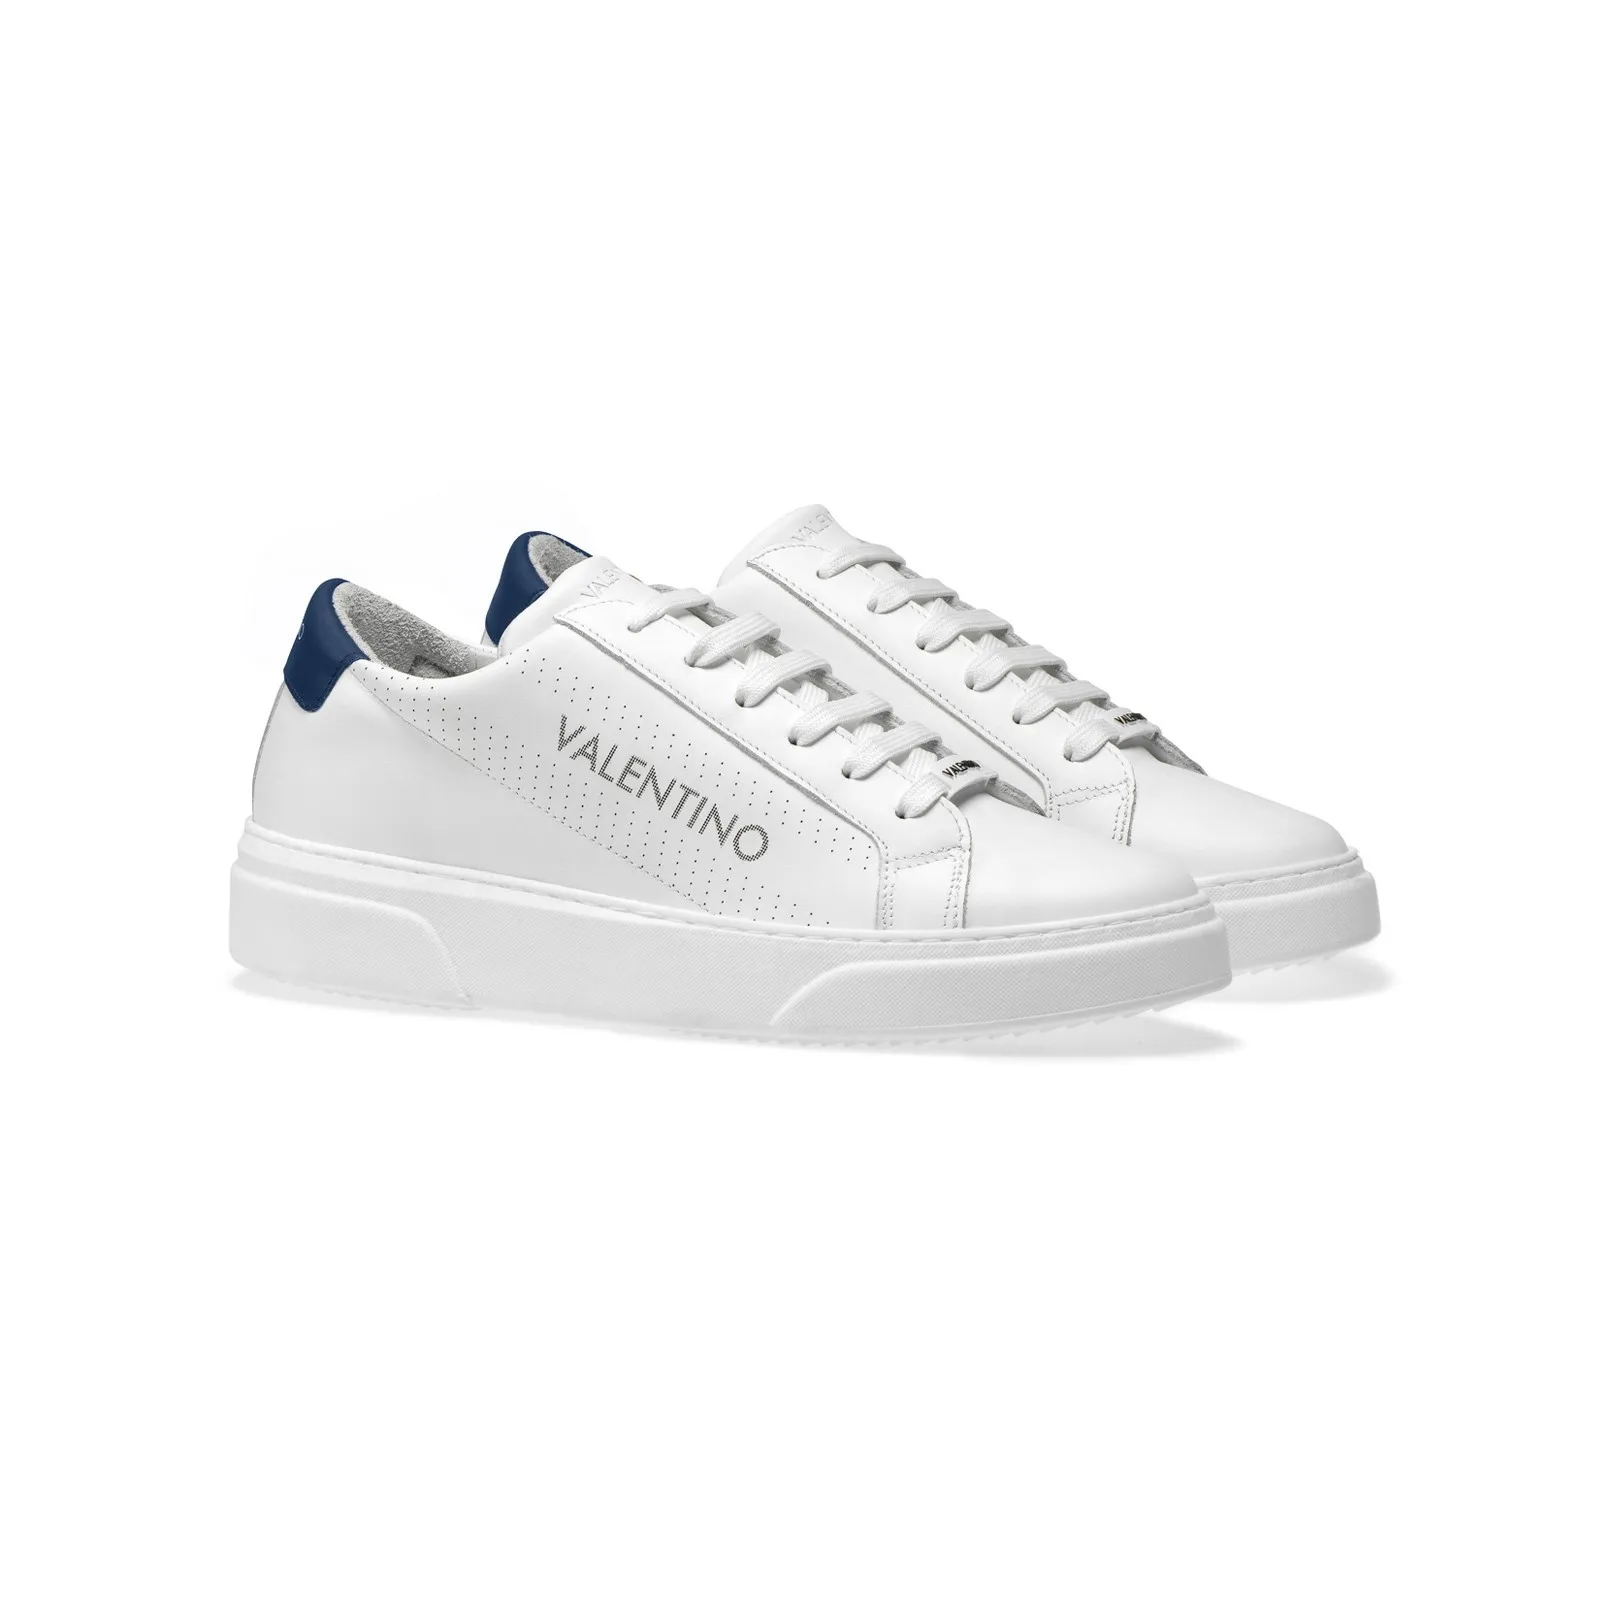 mesh flyde hypotese Original Valentino Shoes Made In Italy Lace-up Sneaker In White Hide And  Blu Insert For Leisure Time - Buy Men Sneakers,Valentino Shoes,White  Leather Sneaker Product on Alibaba.com